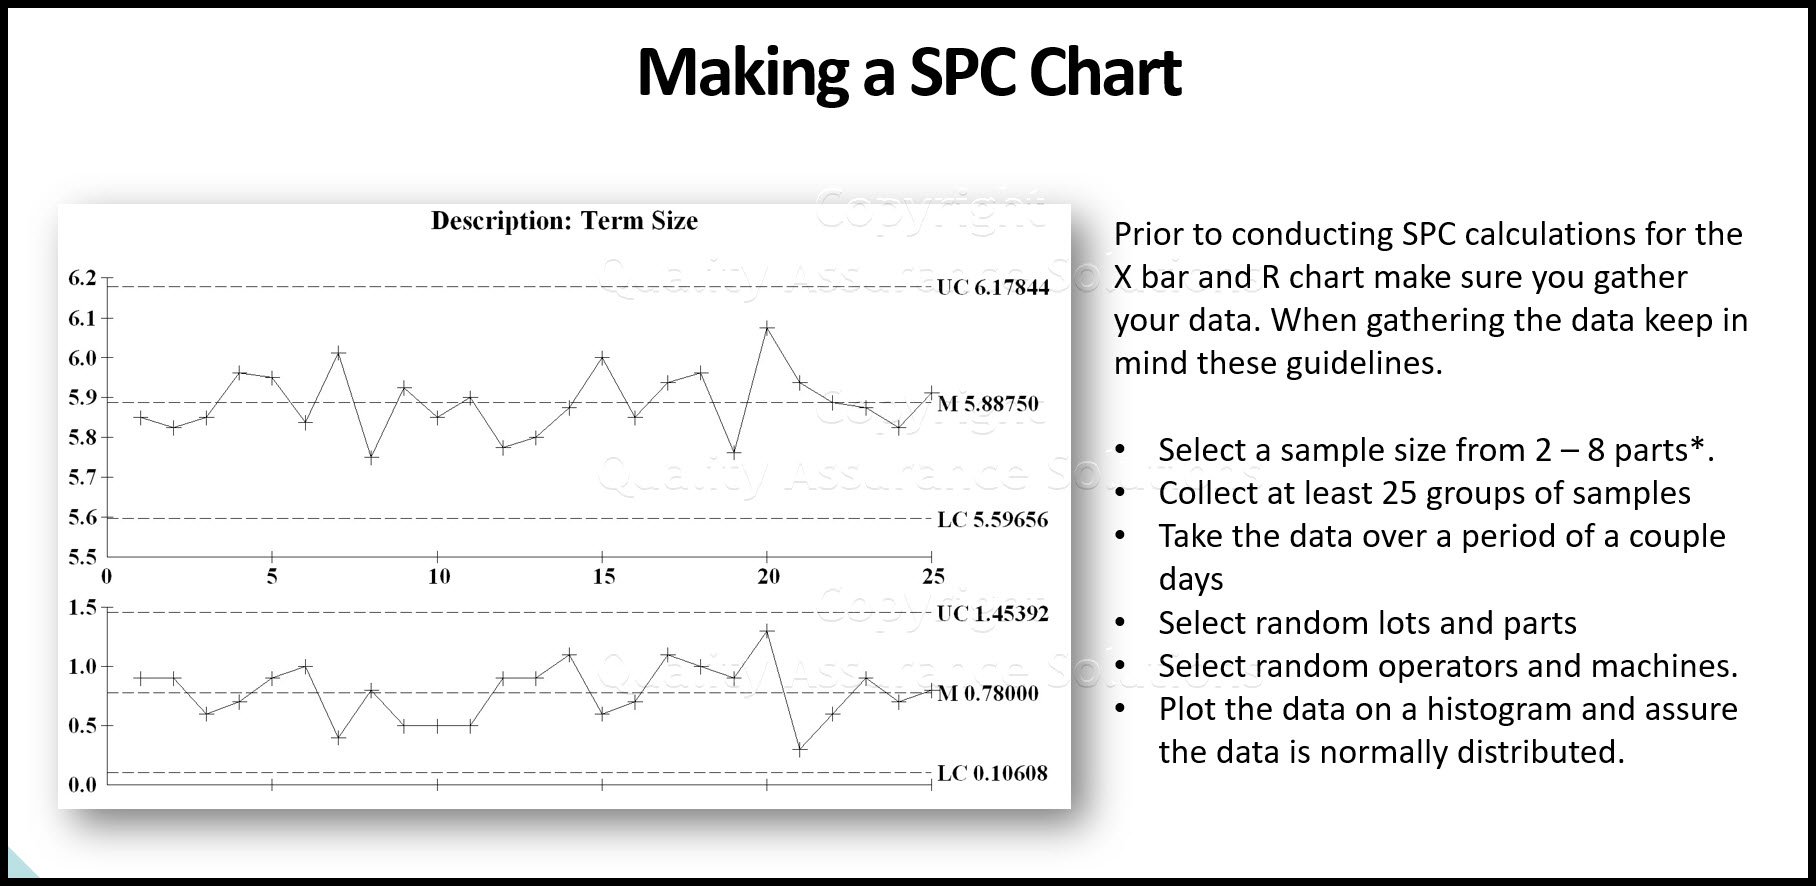 Find out how to conduct SPC calculations here. Page discusses SPC limits